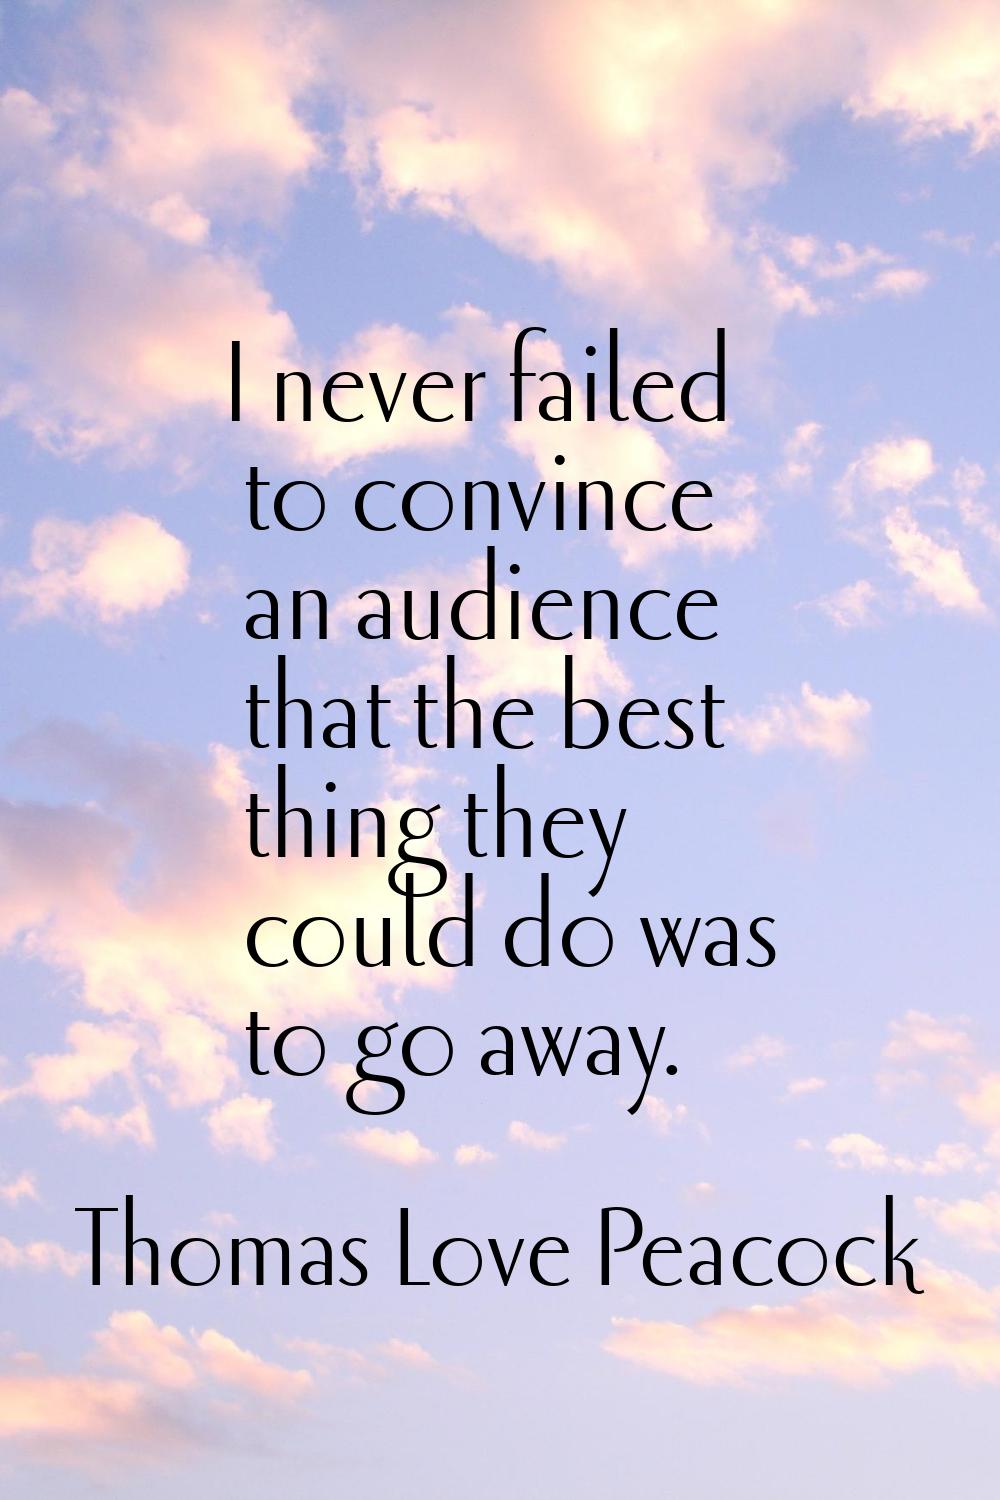 I never failed to convince an audience that the best thing they could do was to go away.